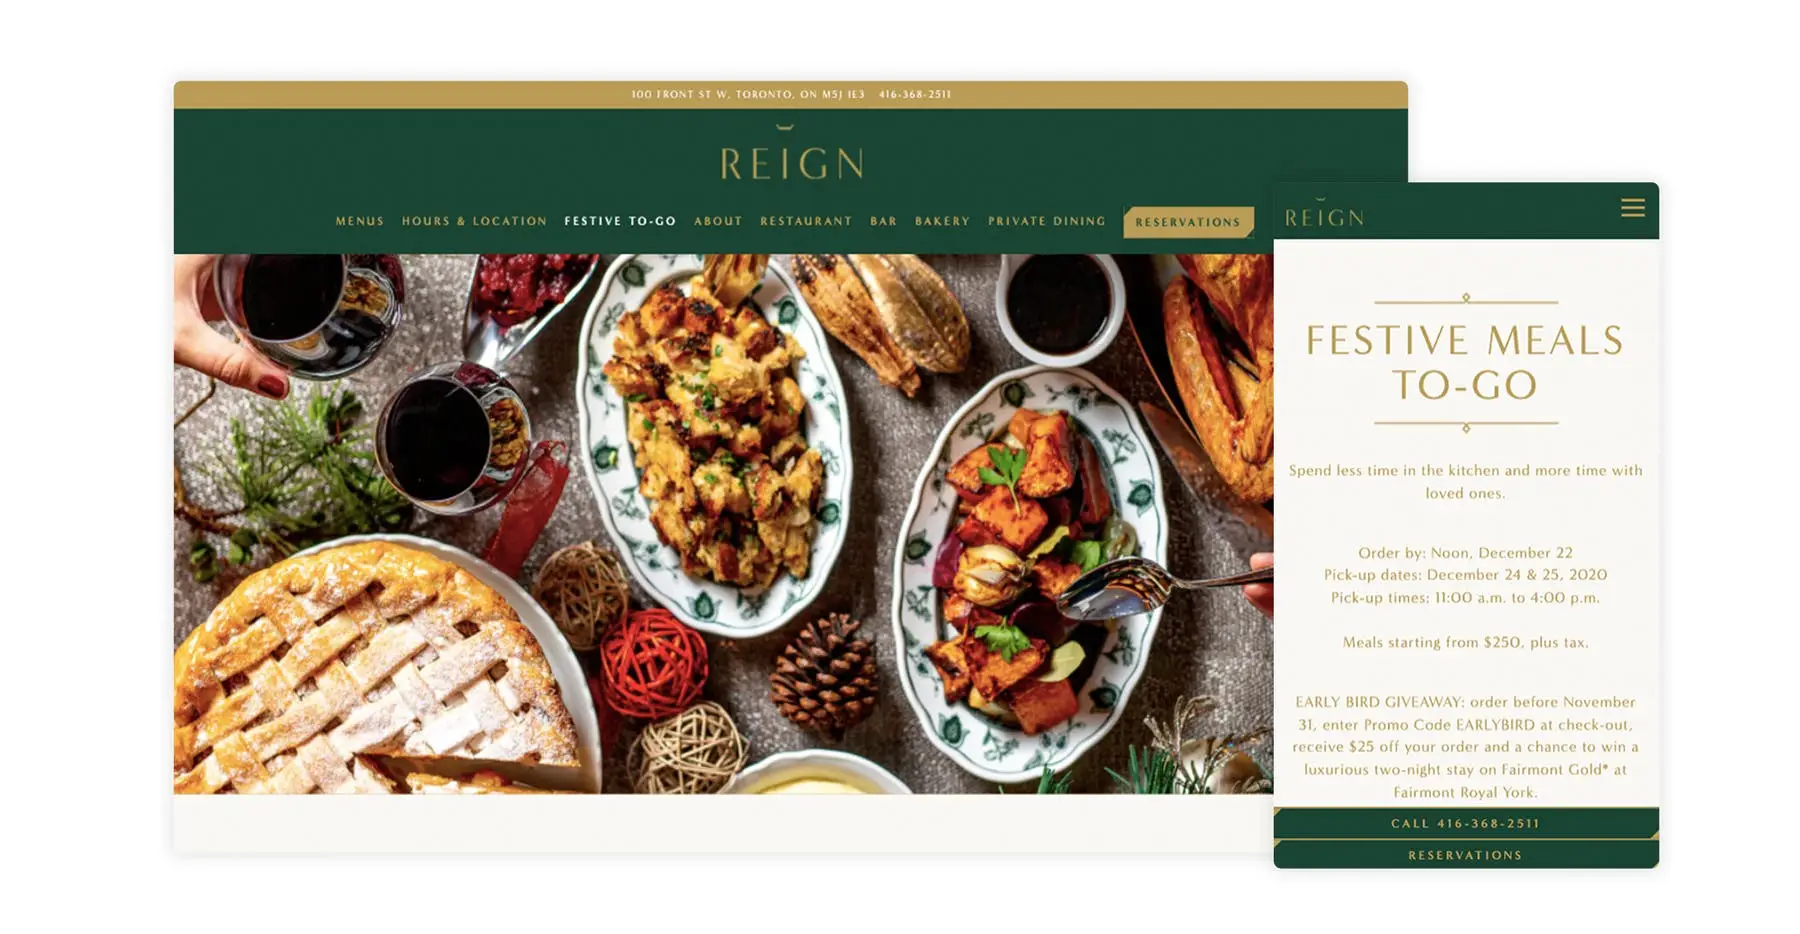 The website for Reign